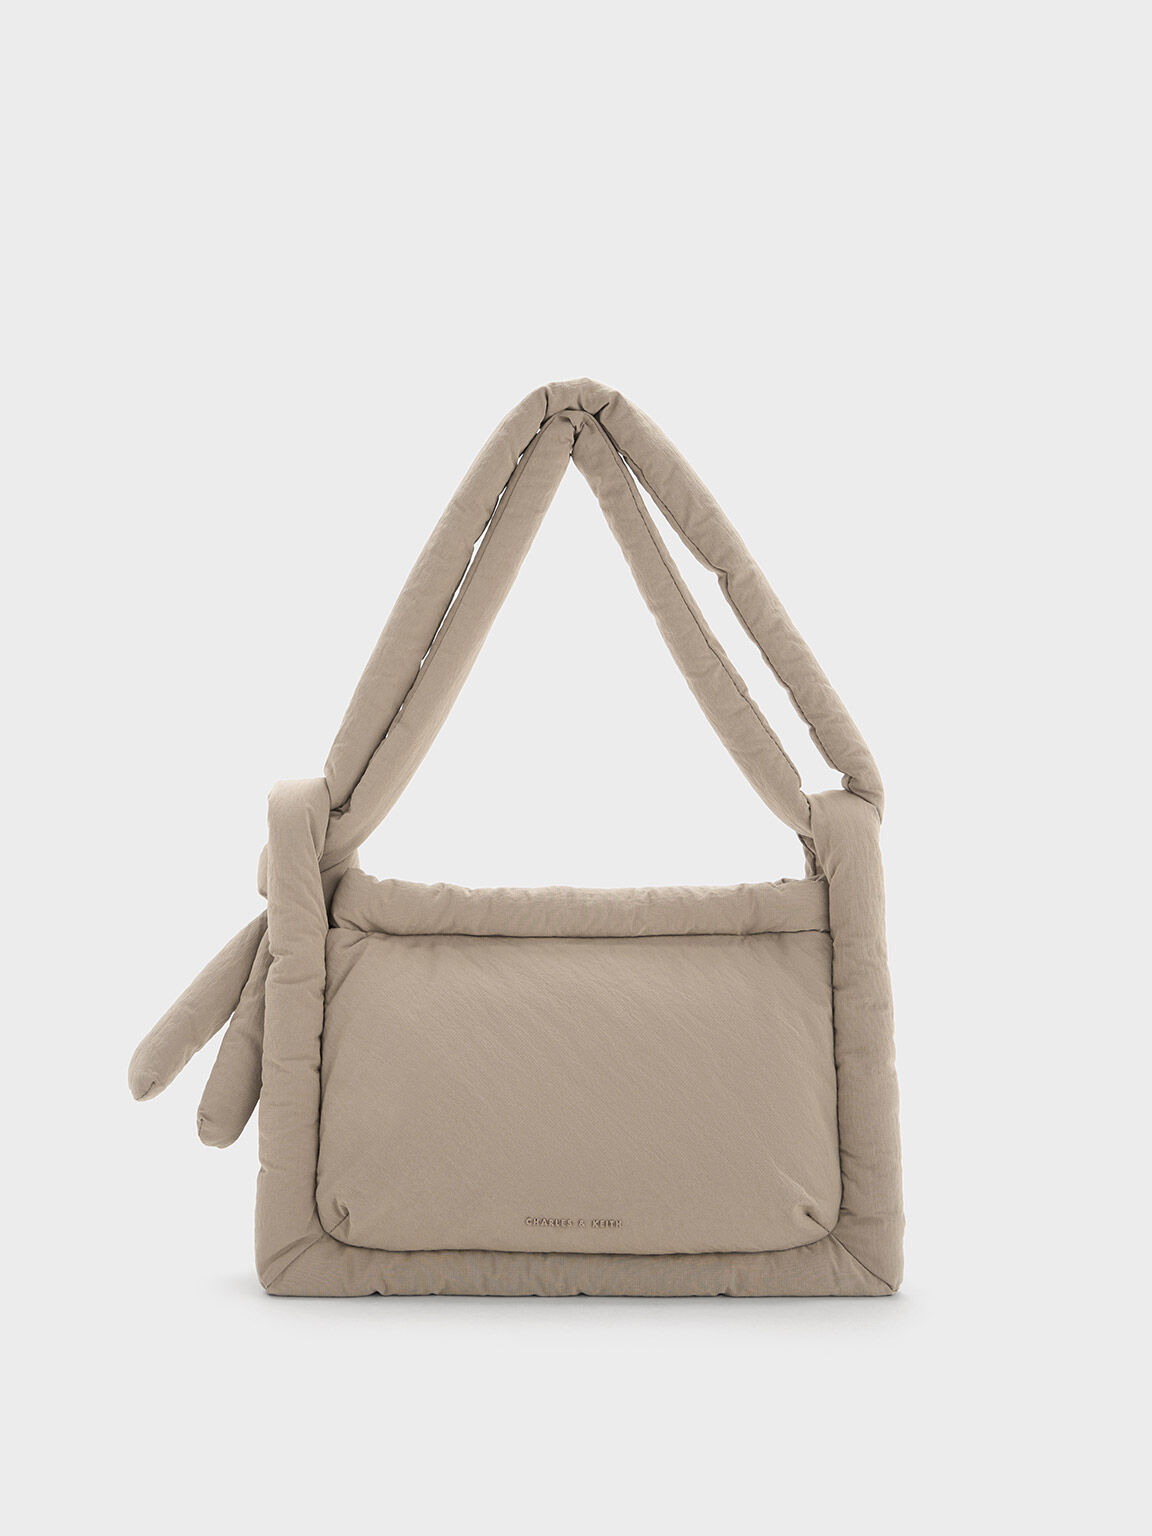 Women's i-Pad backpack in taupe padded nylon